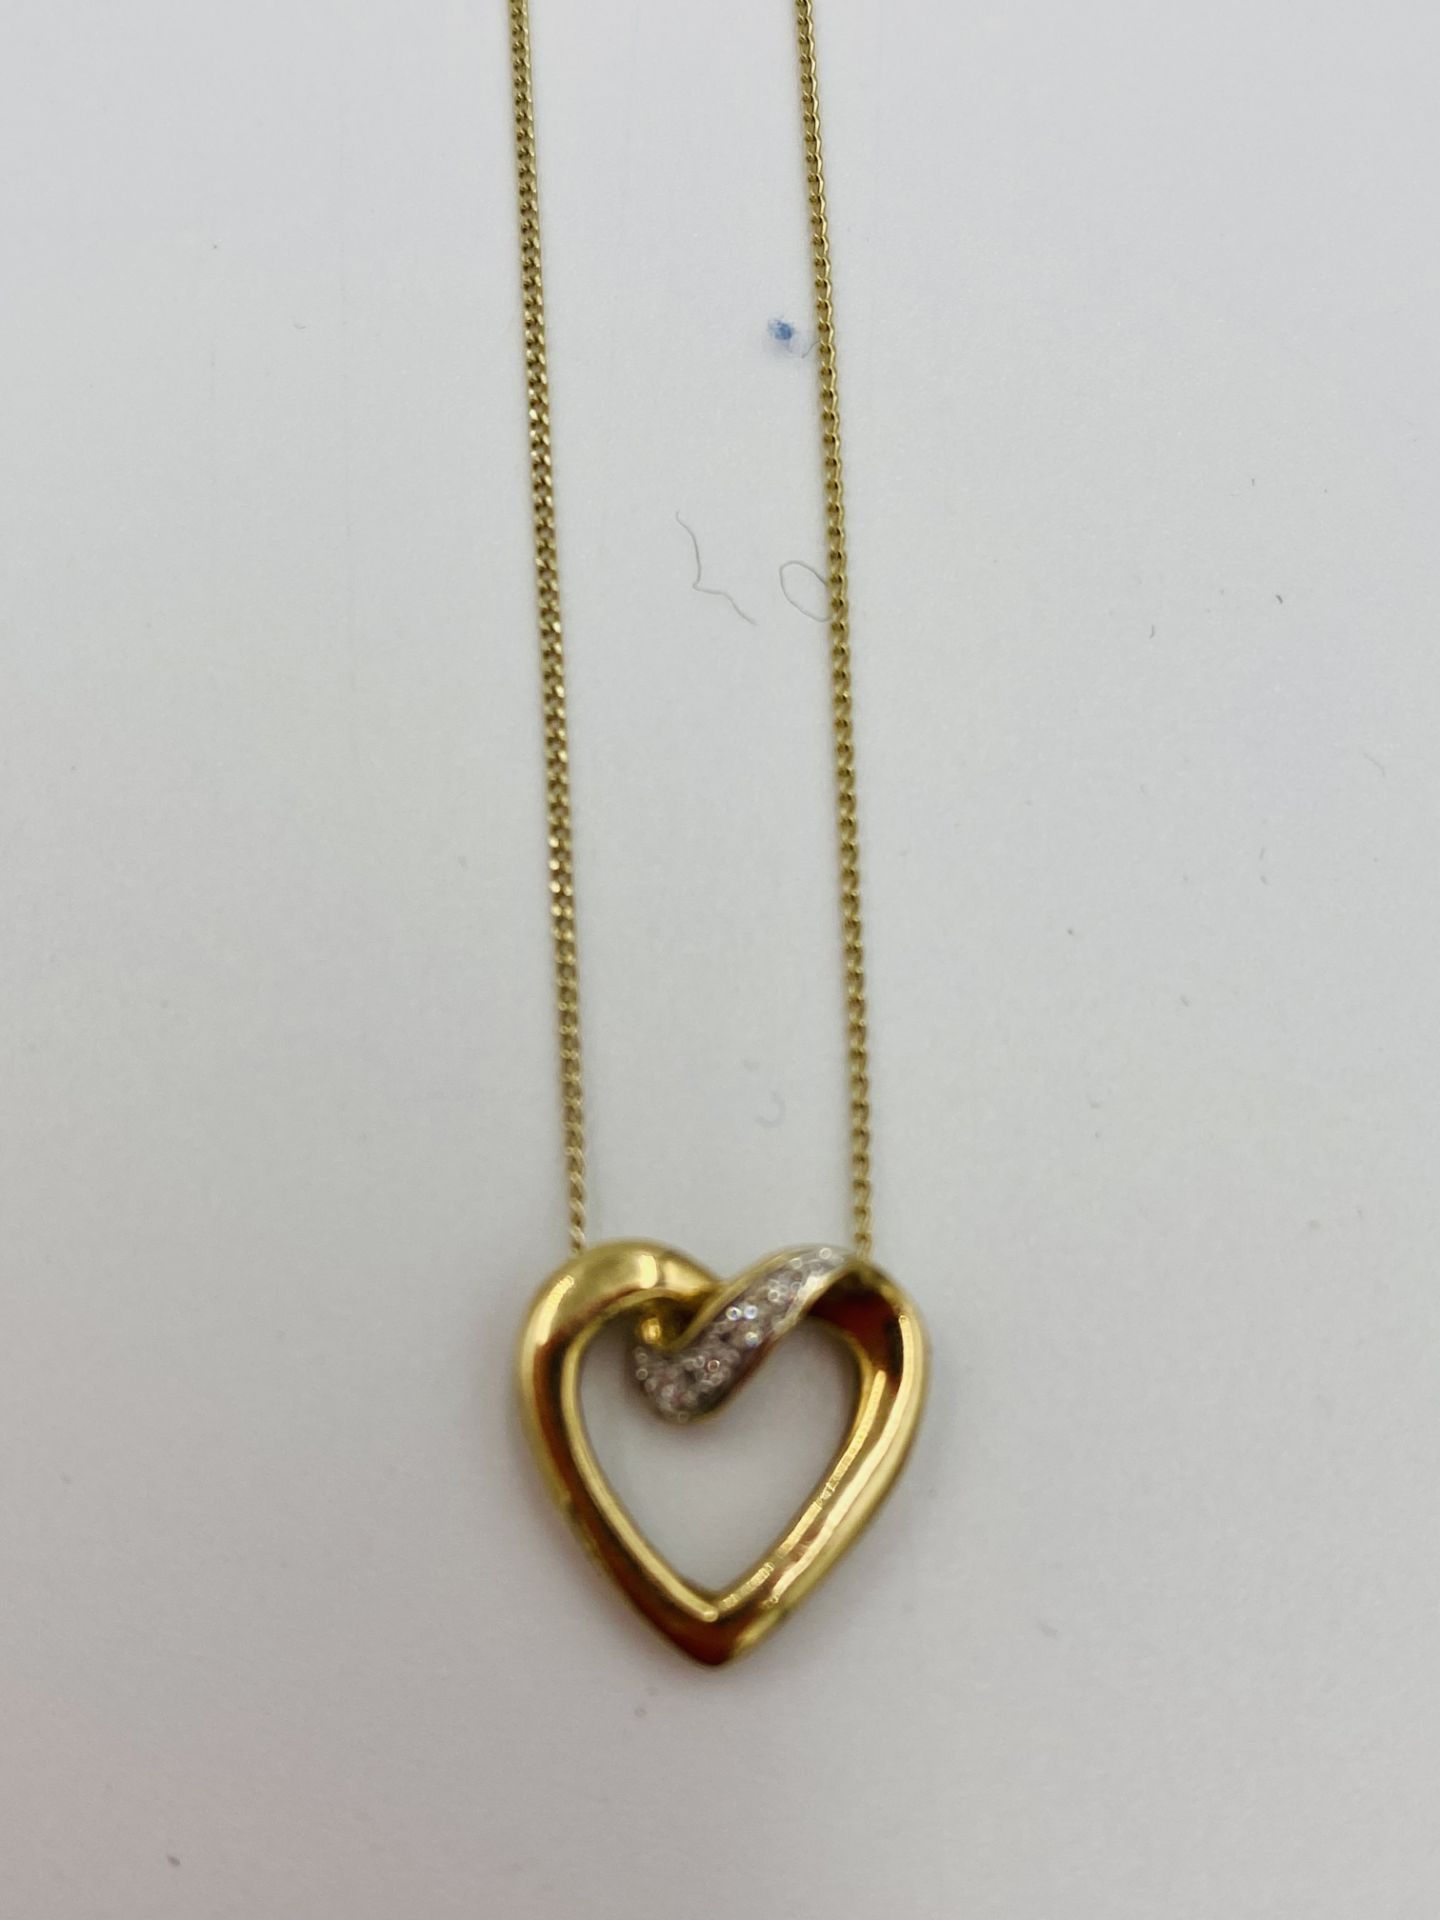 9ct gold heart shaped pendant on 9ct gold chain - Image 3 of 4